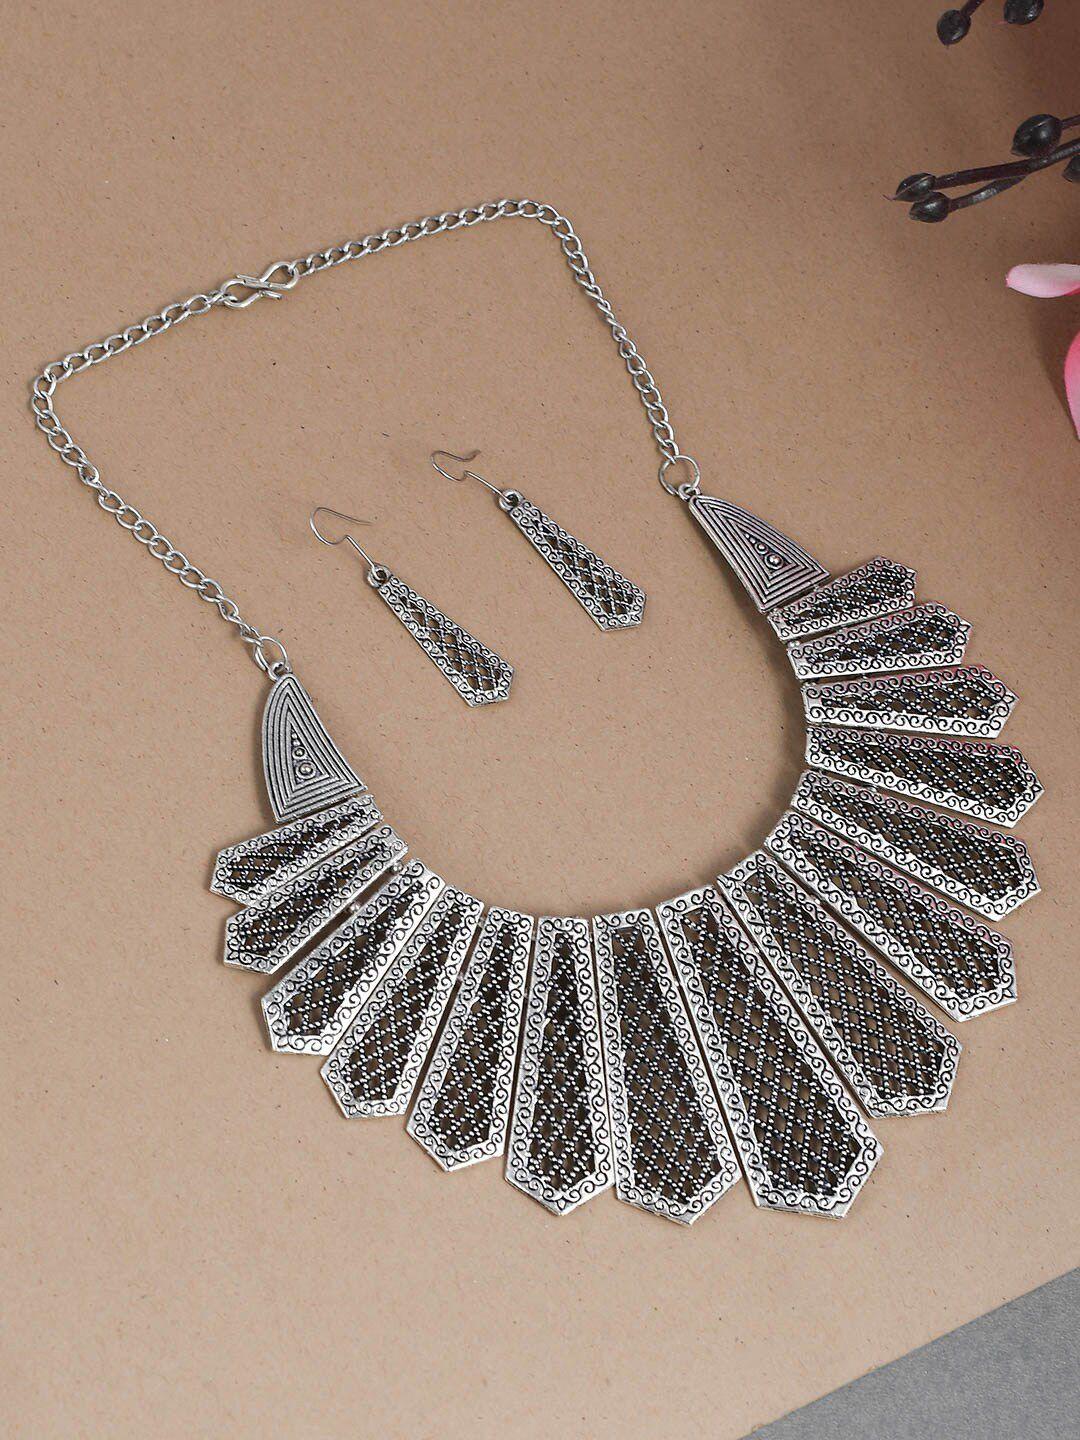 silvermerc designs oxidised silver-plated statement necklace with earrings